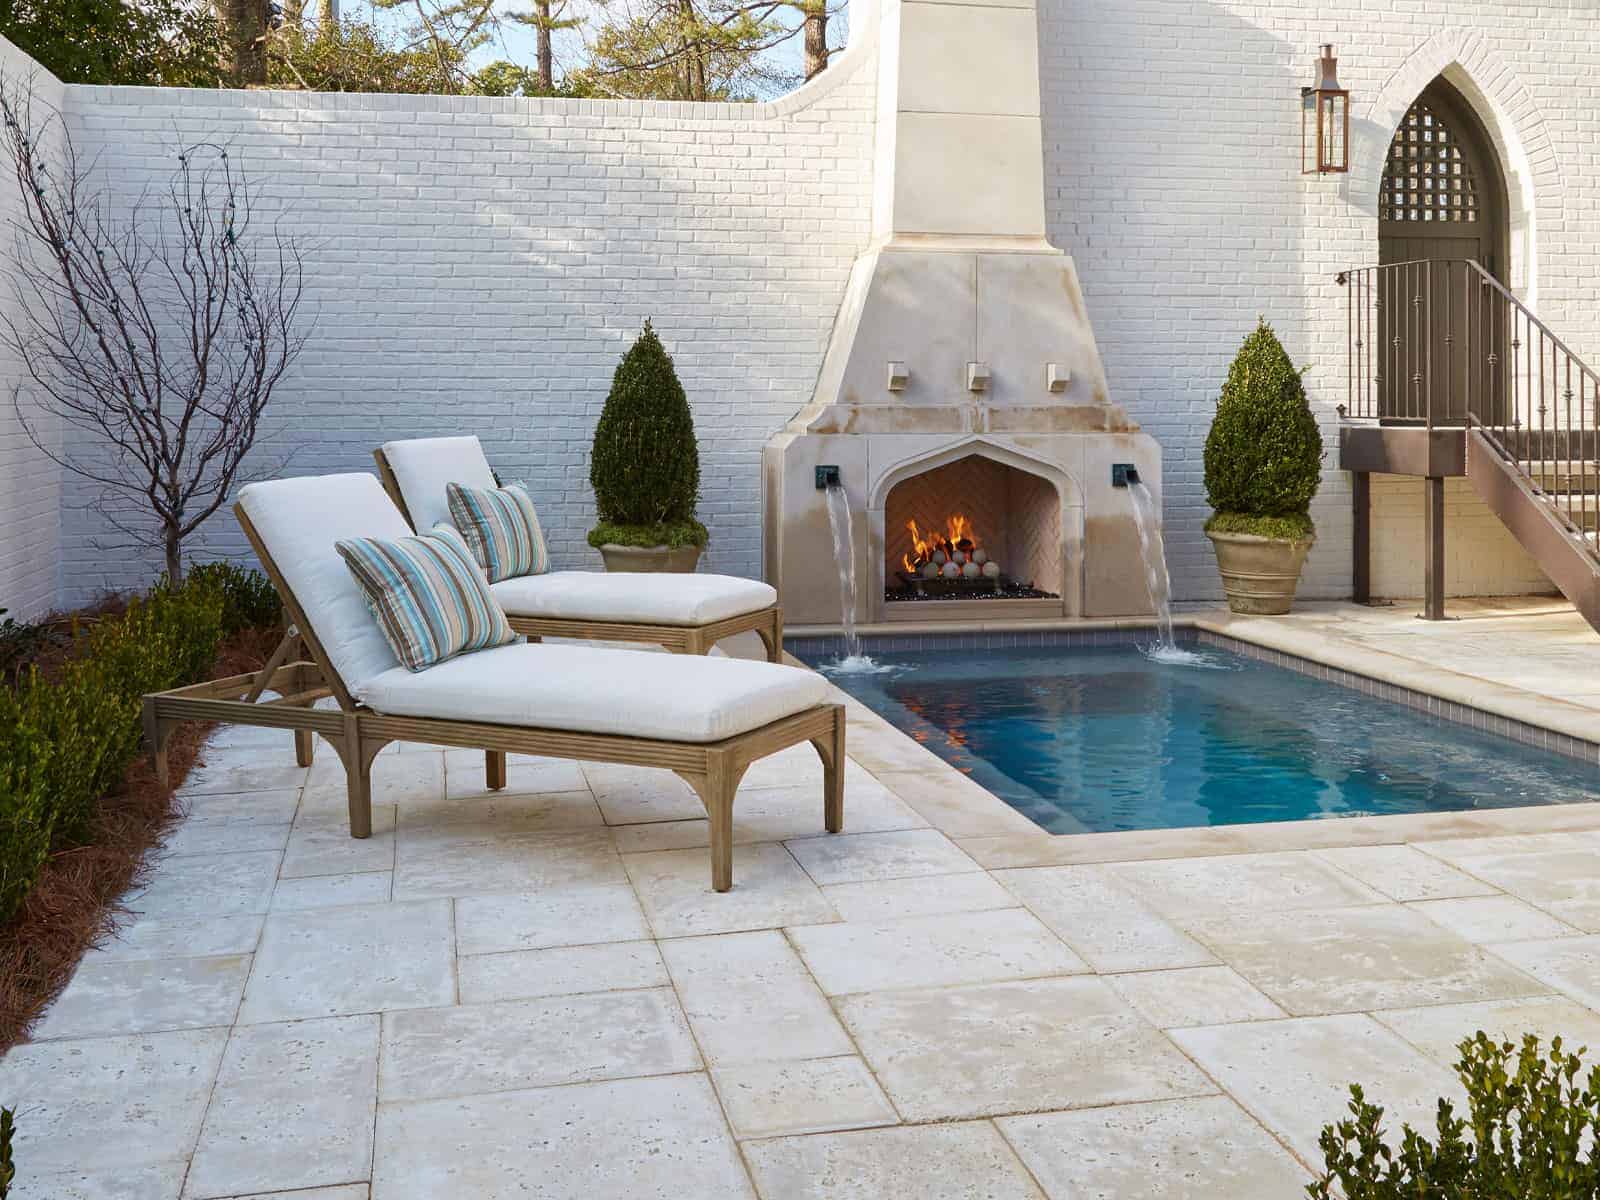 Peacock Pavers around an outdoor pool and fireplace, styled in a Basic Random Pattern.